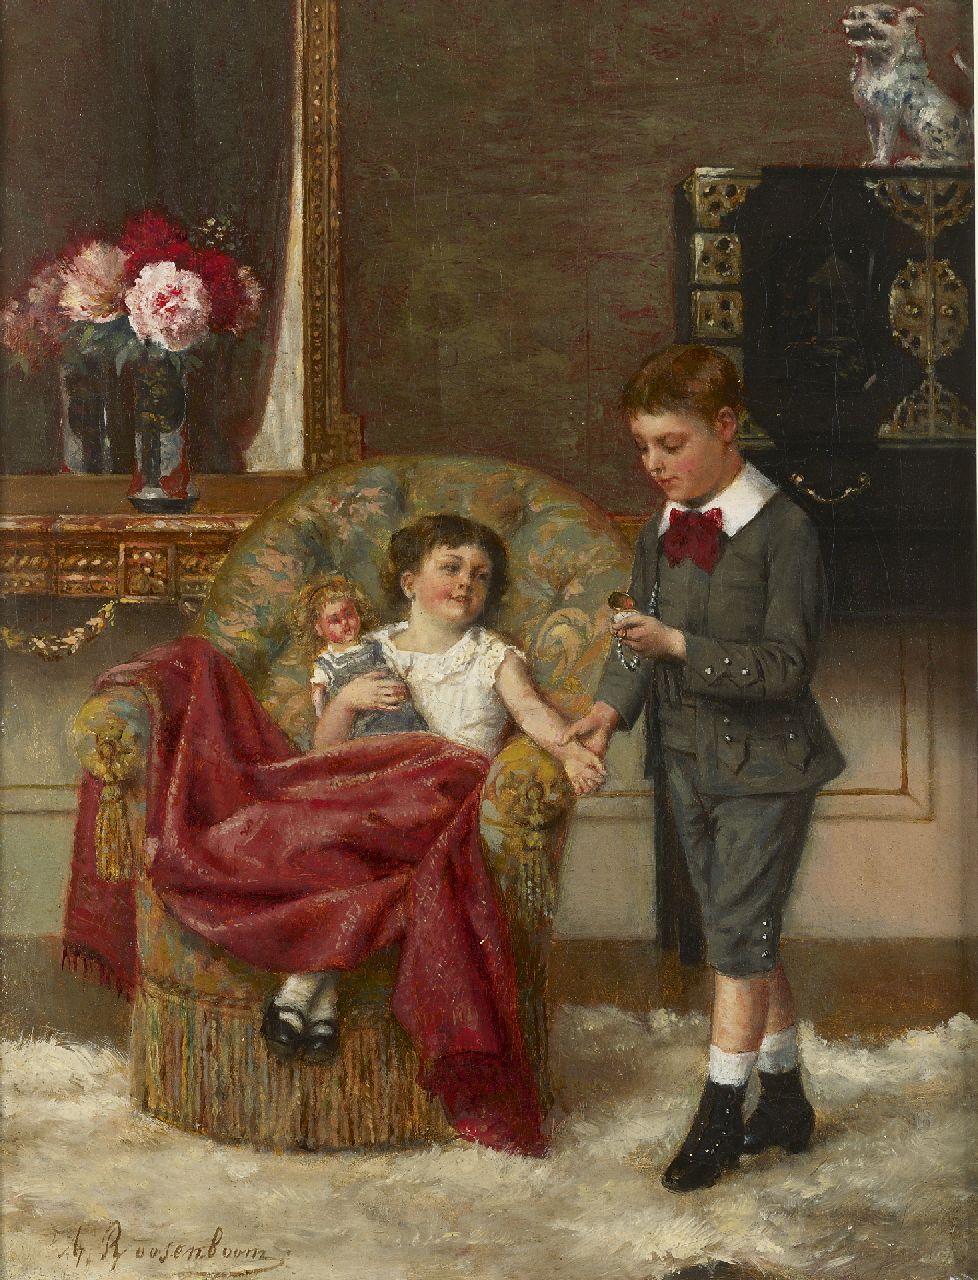 Roosenboom A.  | Albert Roosenboom, The young doctor, Öl auf Leinwand 34,0 x 25,7 cm, signed l.l. und dated 1887 on the reverse